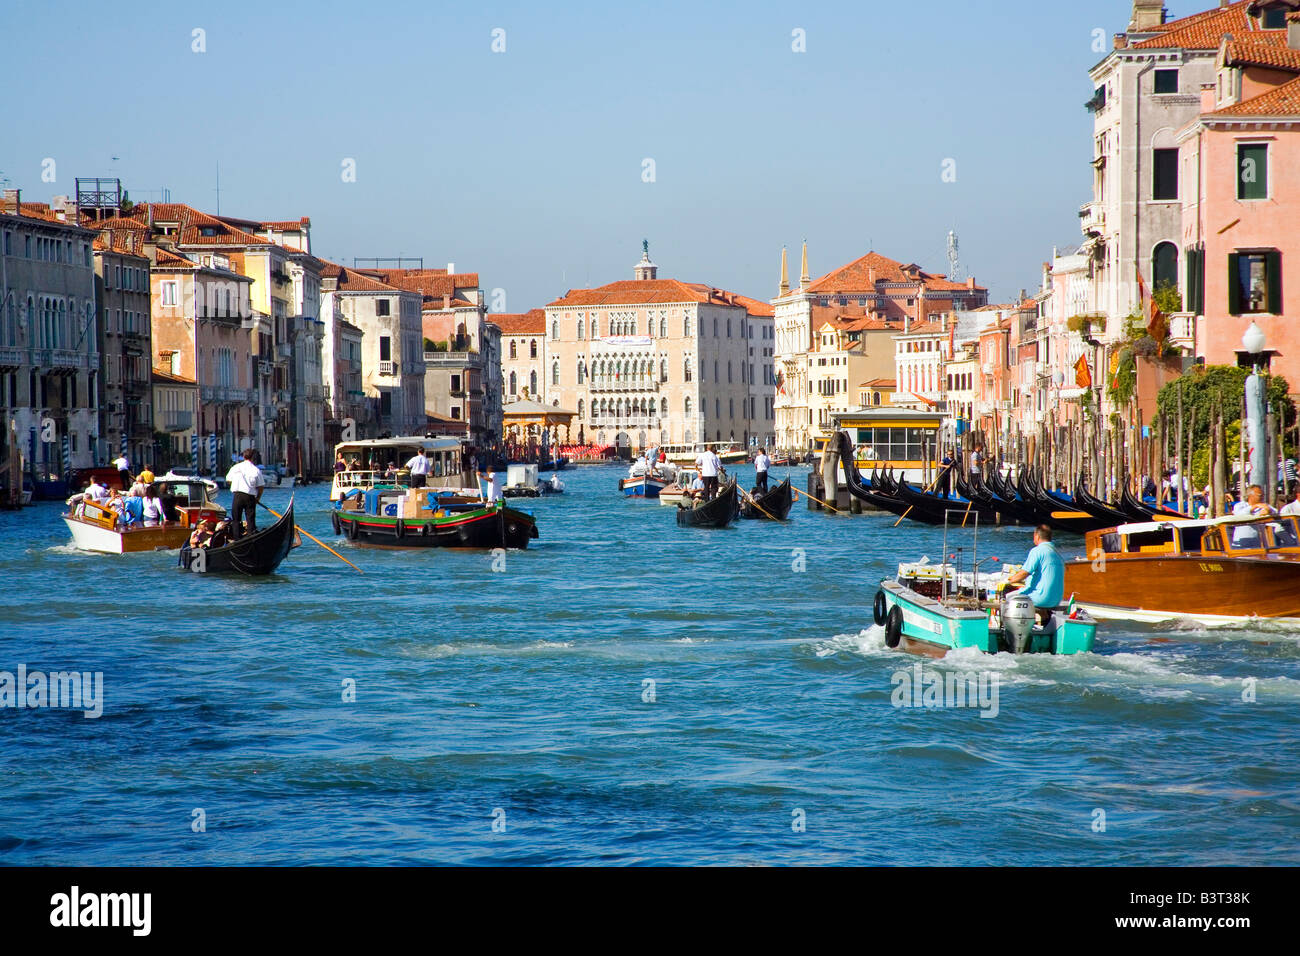 Busy water traffic on the Grand Canal in Venice Stock Photo